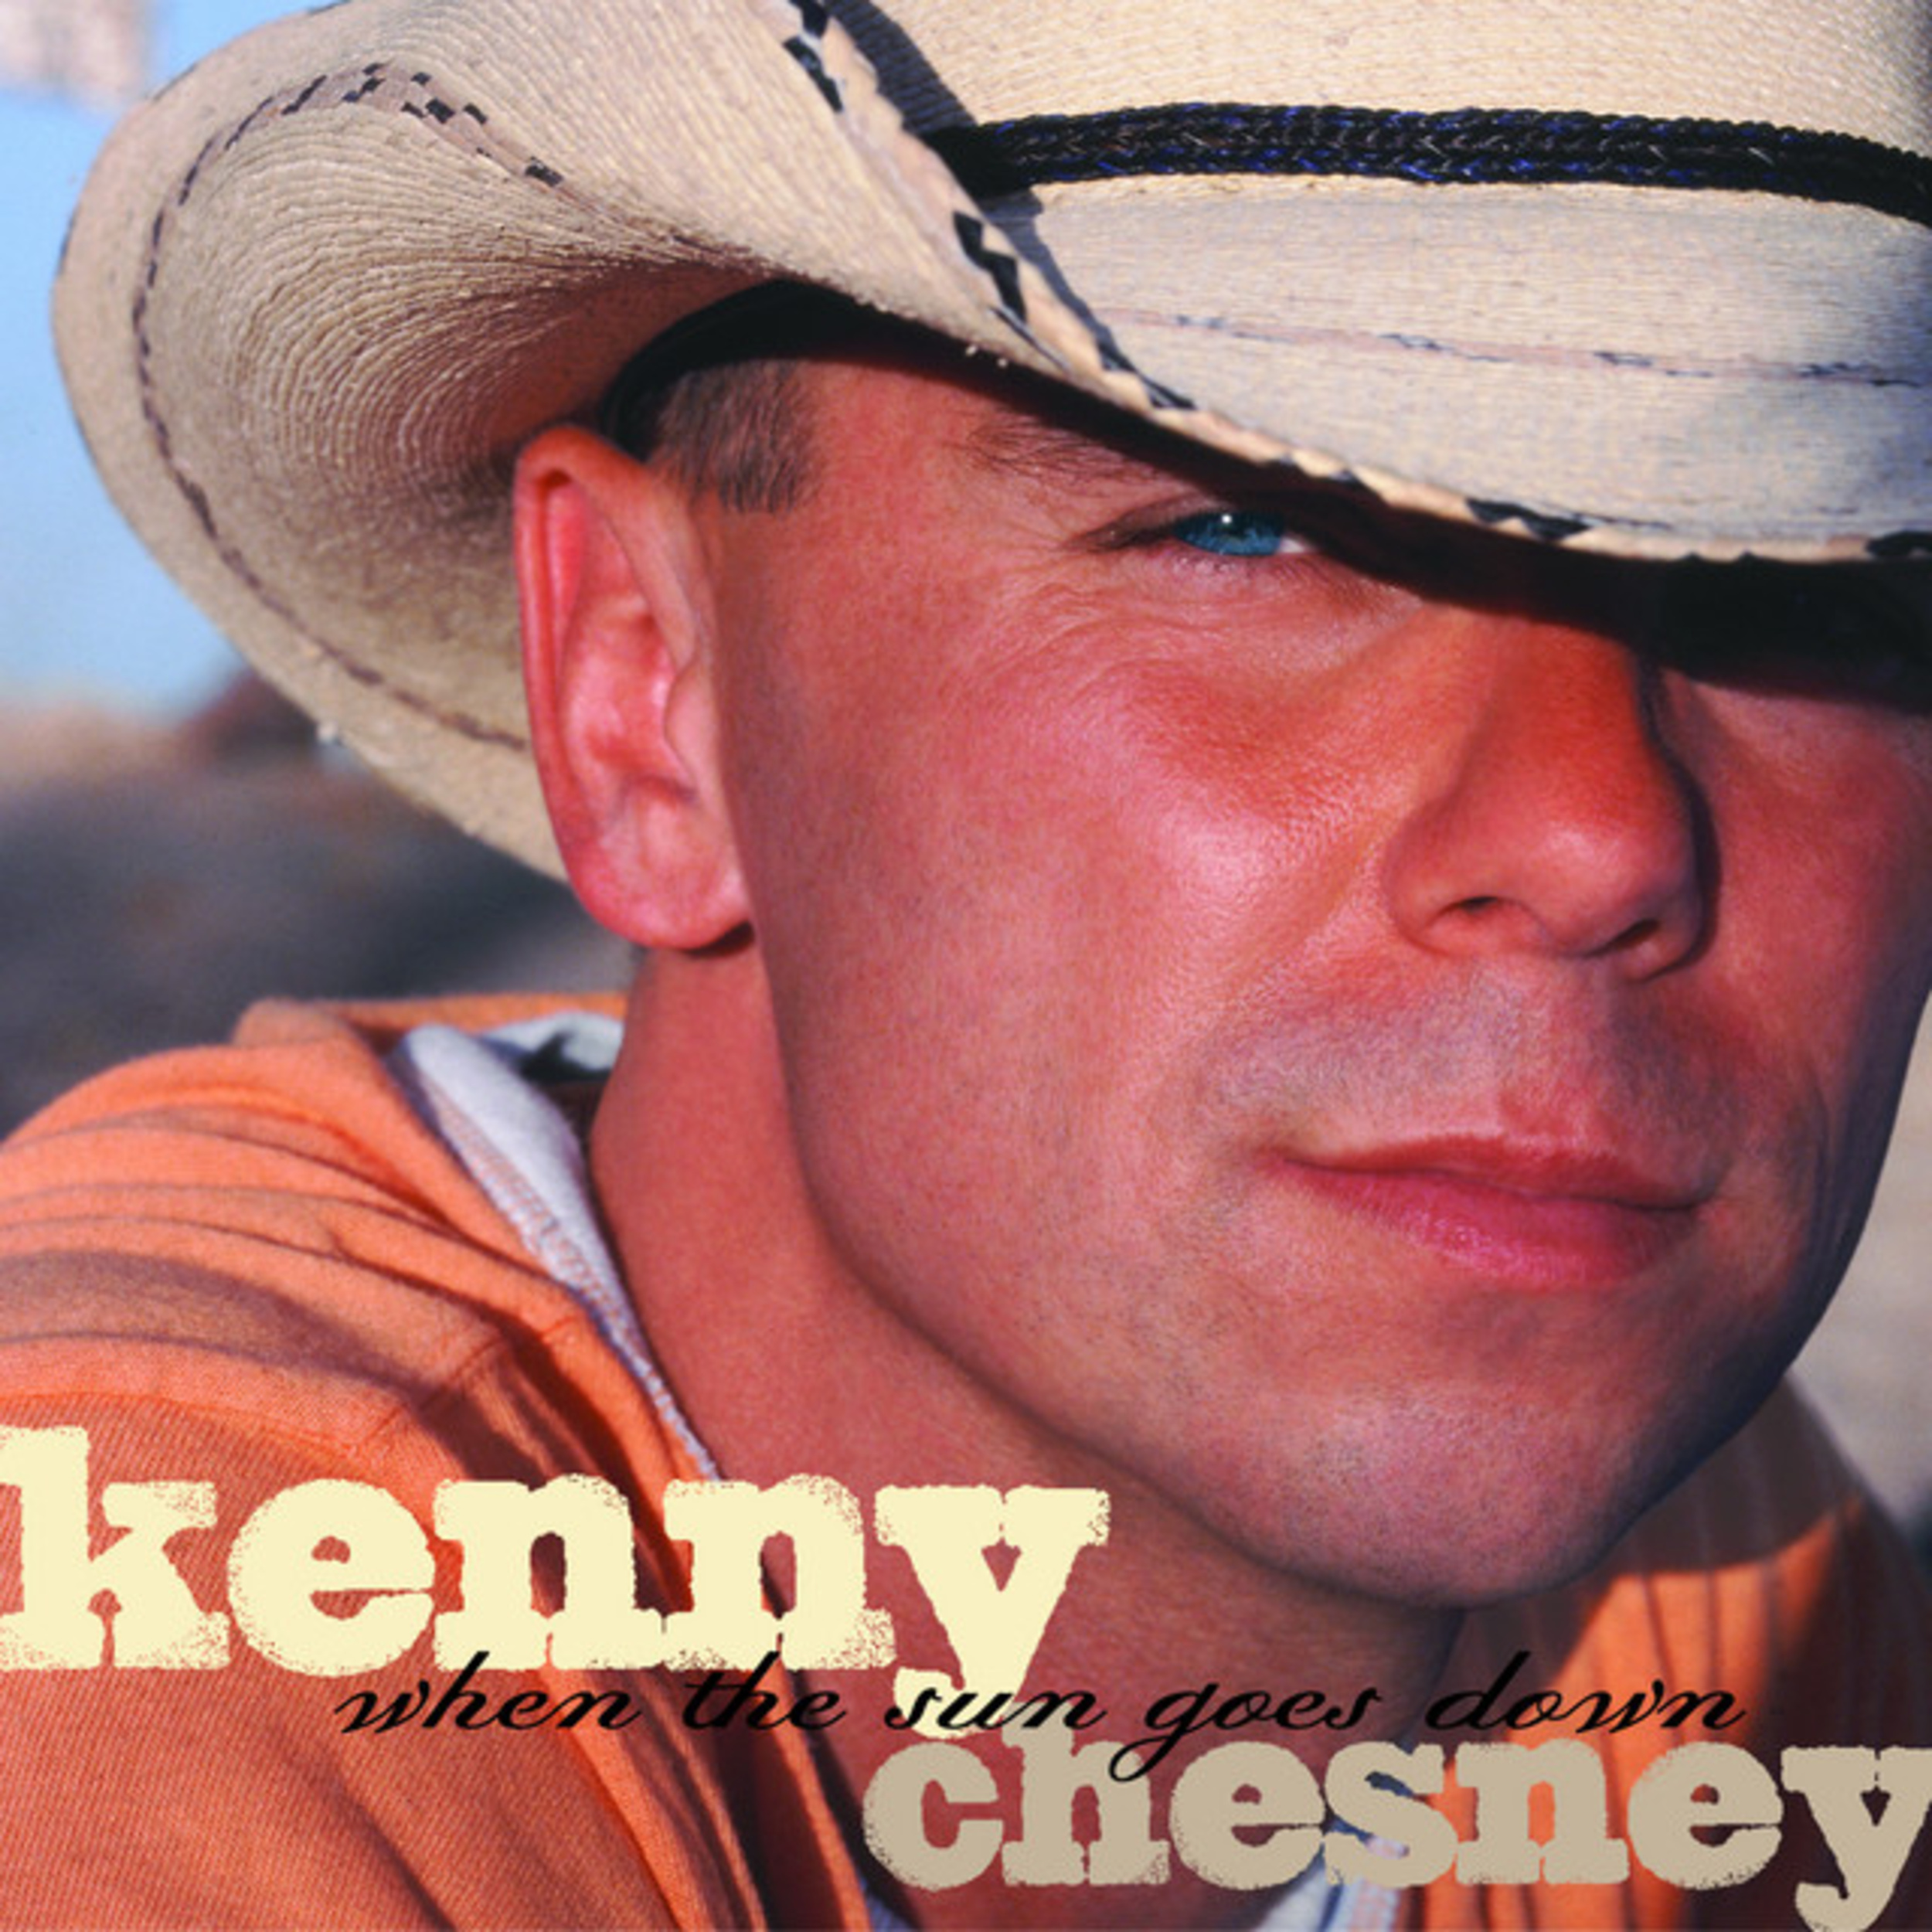 <p>Kenny Chesney took over the country music airwaves with his album <em>When The Sun Goes Down.</em> <a href="https://www.youtube.com/watch?v=eGLdbpmXrbQ">The title track</a> features Uncle Kracker, and it's the perfect song to play for a smooth line dance. Some of Chesney's other hit singles include "There Goes My Life," "I Go Back," and "The Woman With You." </p><p><a href='https://www.msn.com/en-us/community/channel/vid-cj9pqbr0vn9in2b6ddcd8sfgpfq6x6utp44fssrv6mc2gtybw0us'>Follow us on MSN to see more of our exclusive entertainment content.</a></p>